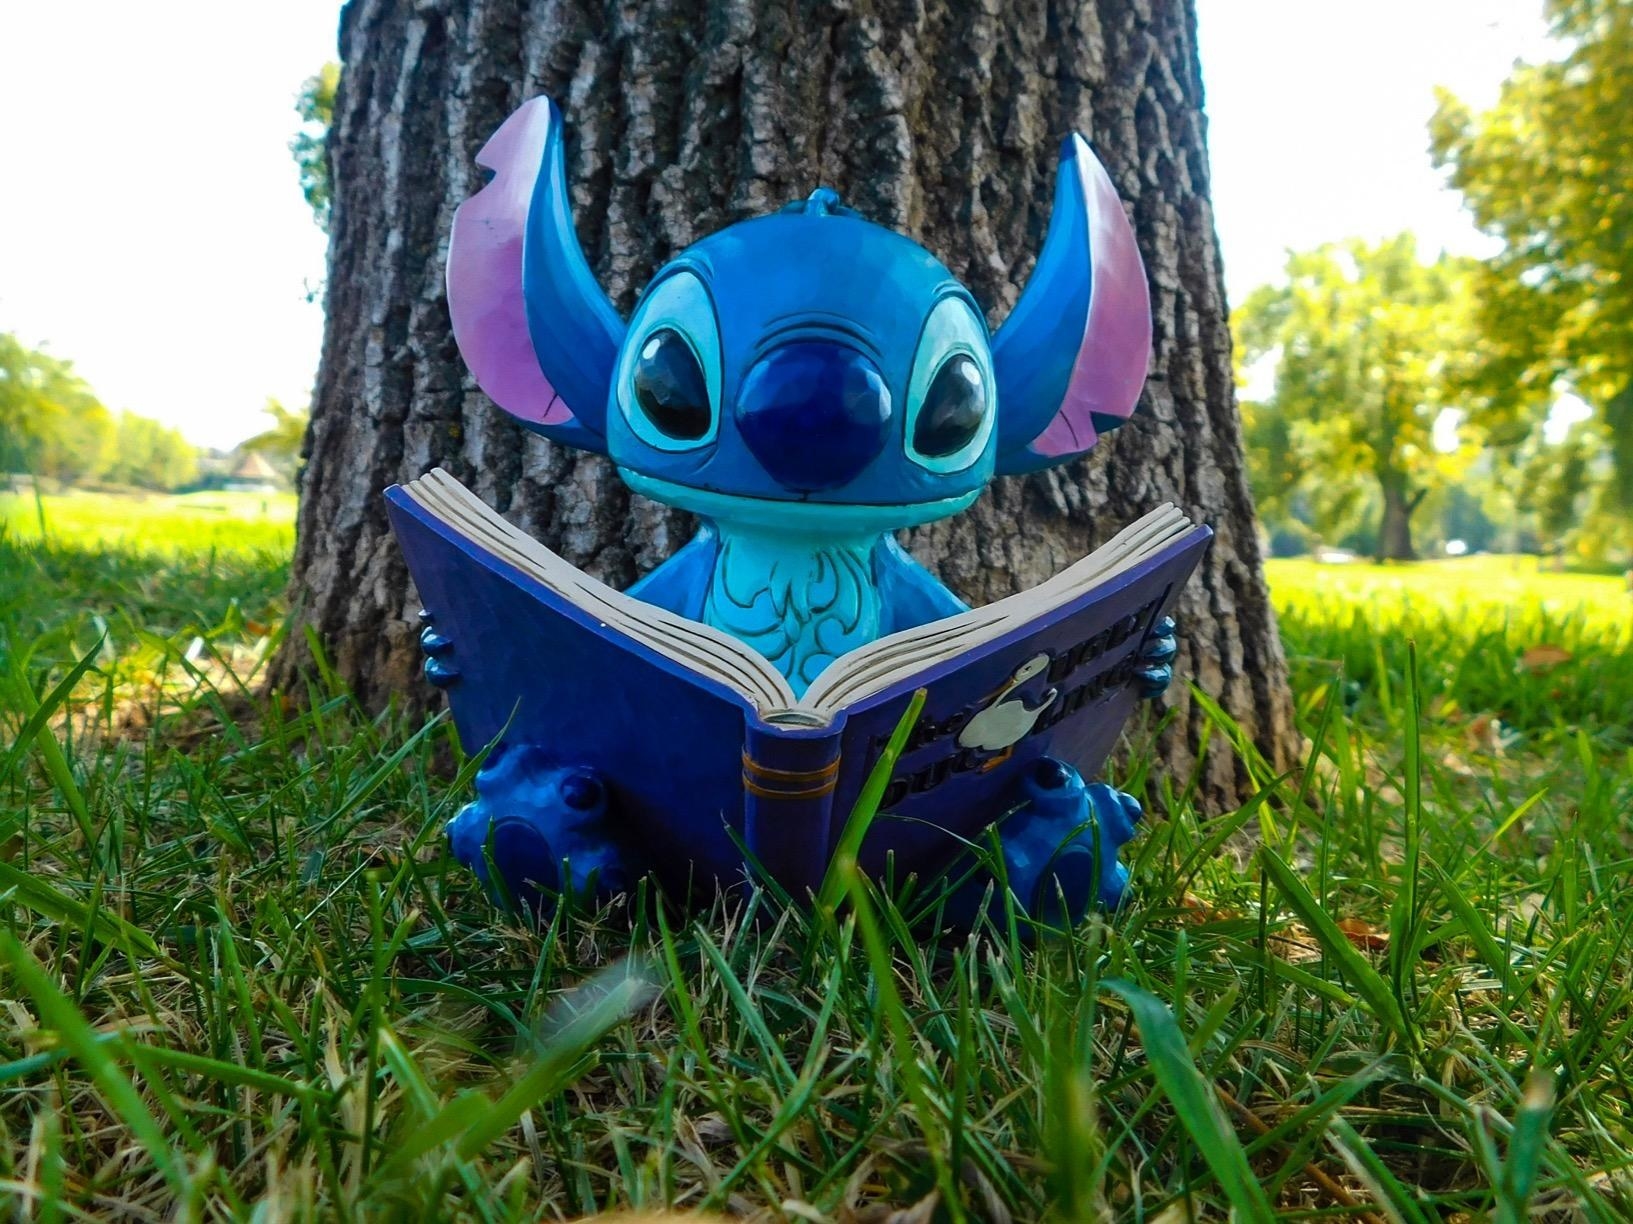 stitch reading ugly duckling